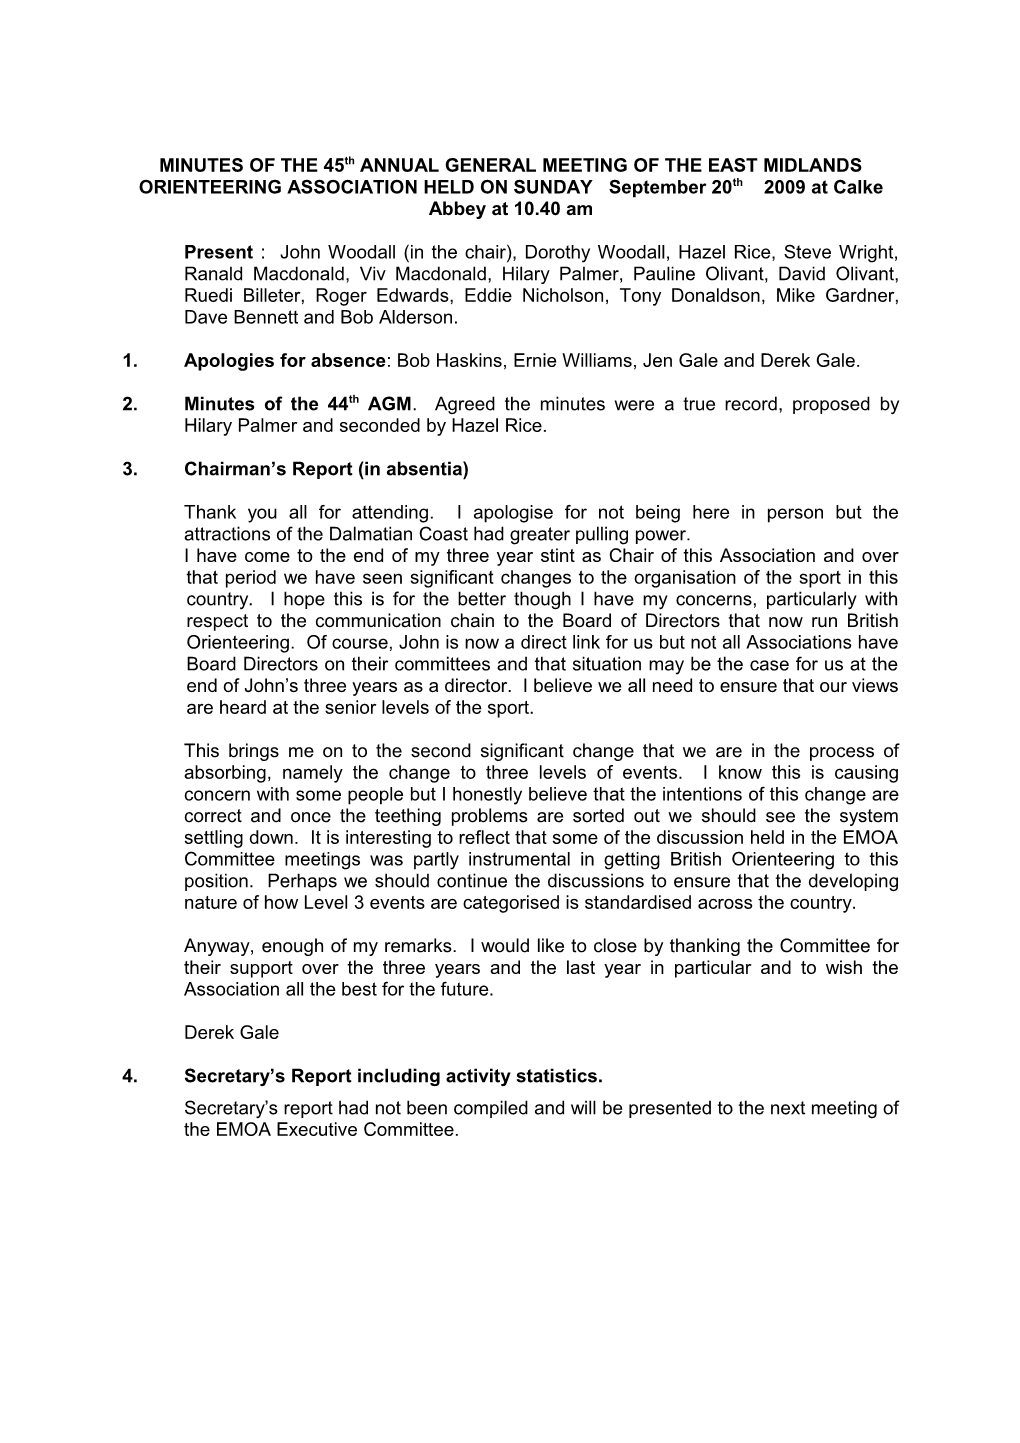 MINUTES of the 45Th ANNUAL GENERAL MEETING of the EAST MIDLANDS ORIENTEERING ASSOCIATION